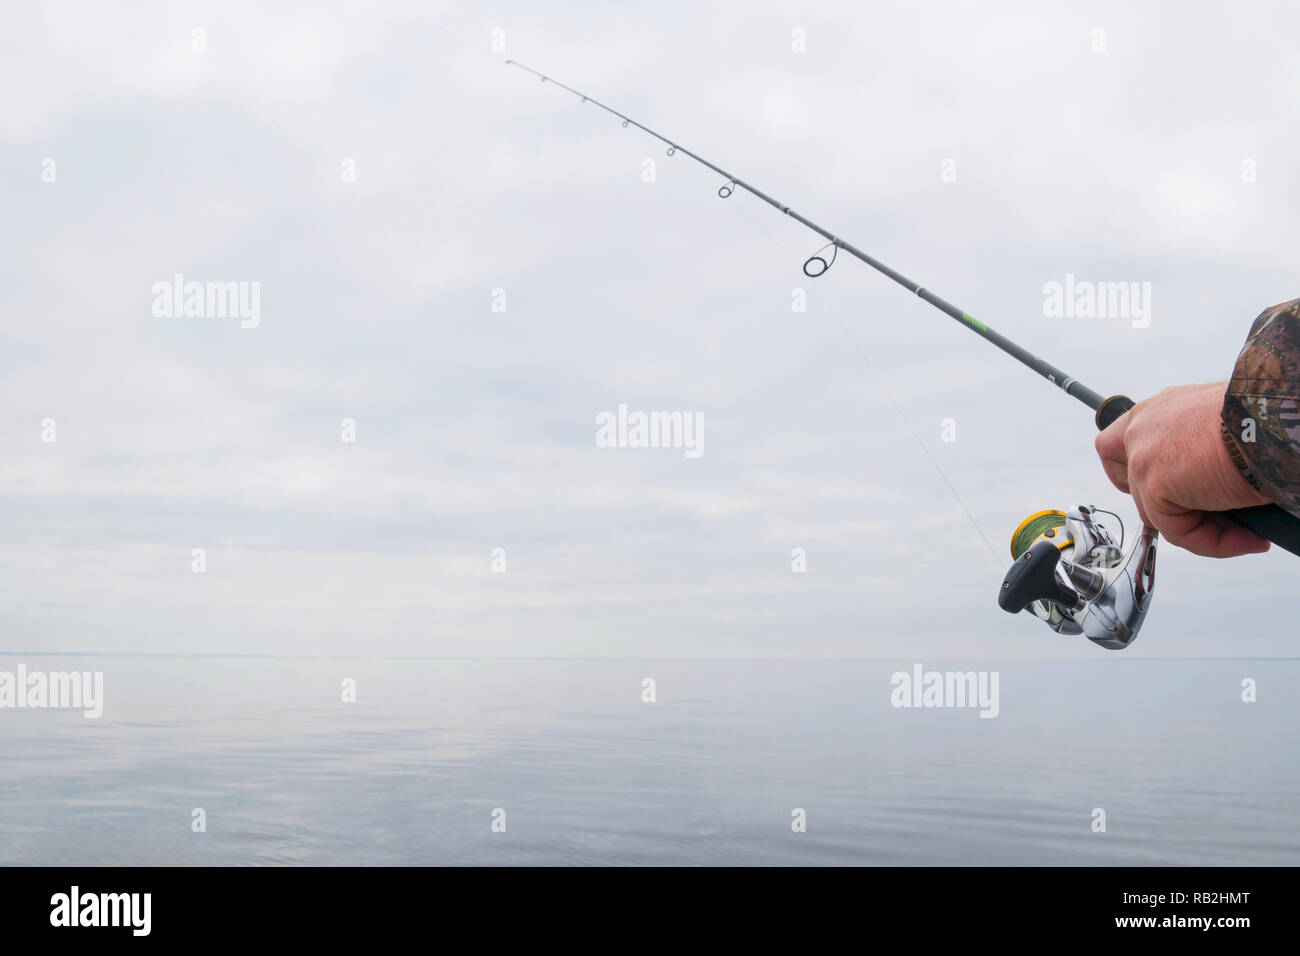 Hands of a fisherman with a spinning rod with the line with a line on a motor boat in the lake on a cloudy day Stock Photo